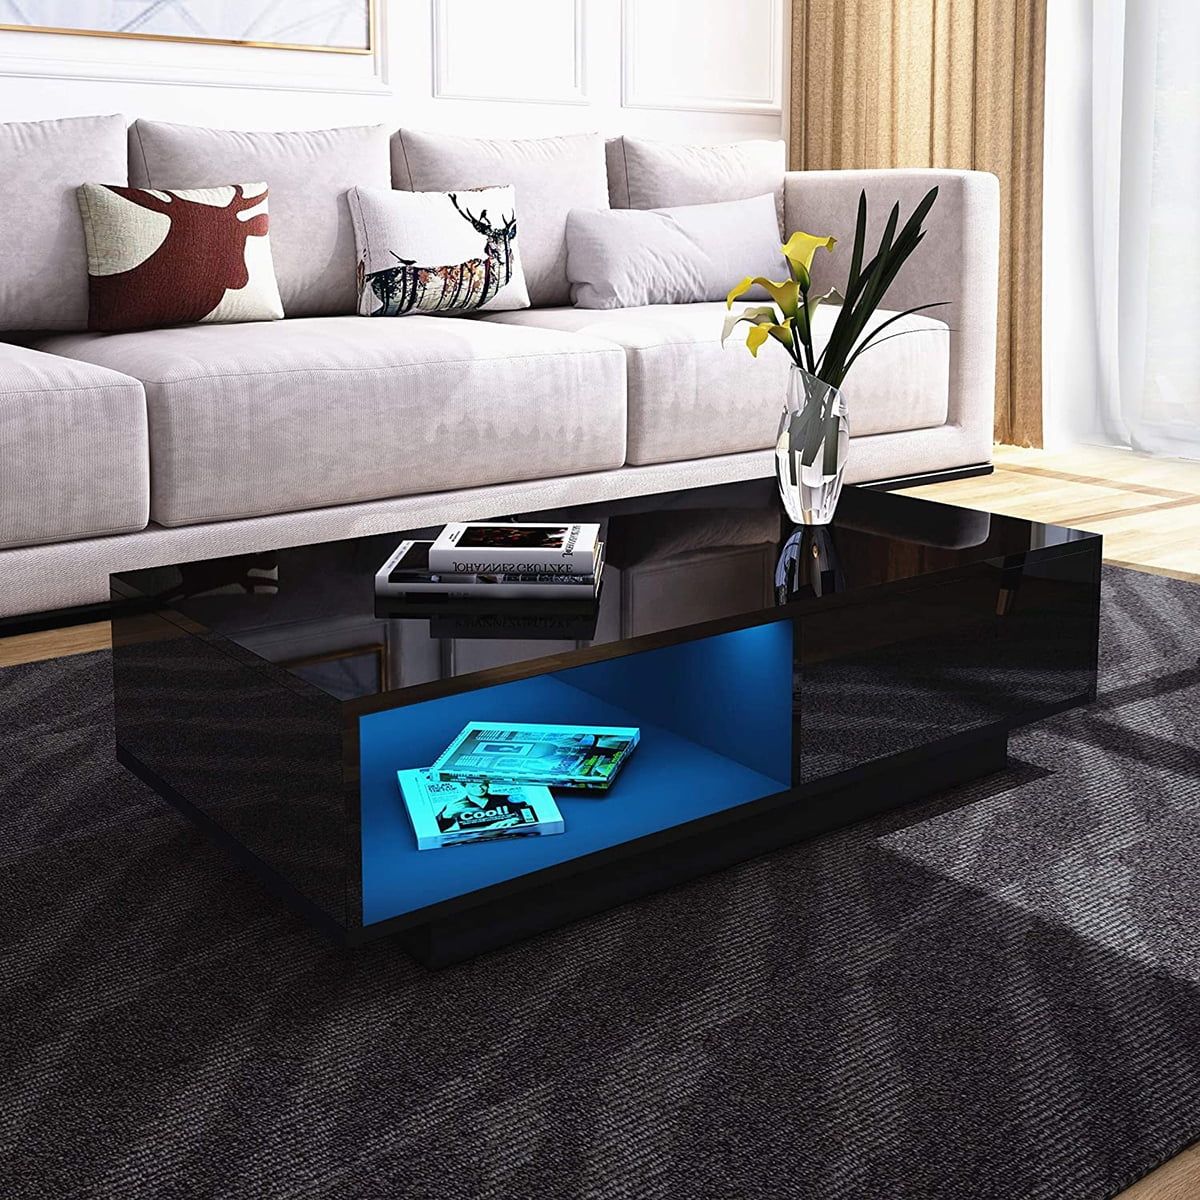 Modern High Gloss Coffee Table With Drawers, Led Sofa Side End Desk Intended For Coffee Tables With Drawers And Led Lights (View 4 of 15)